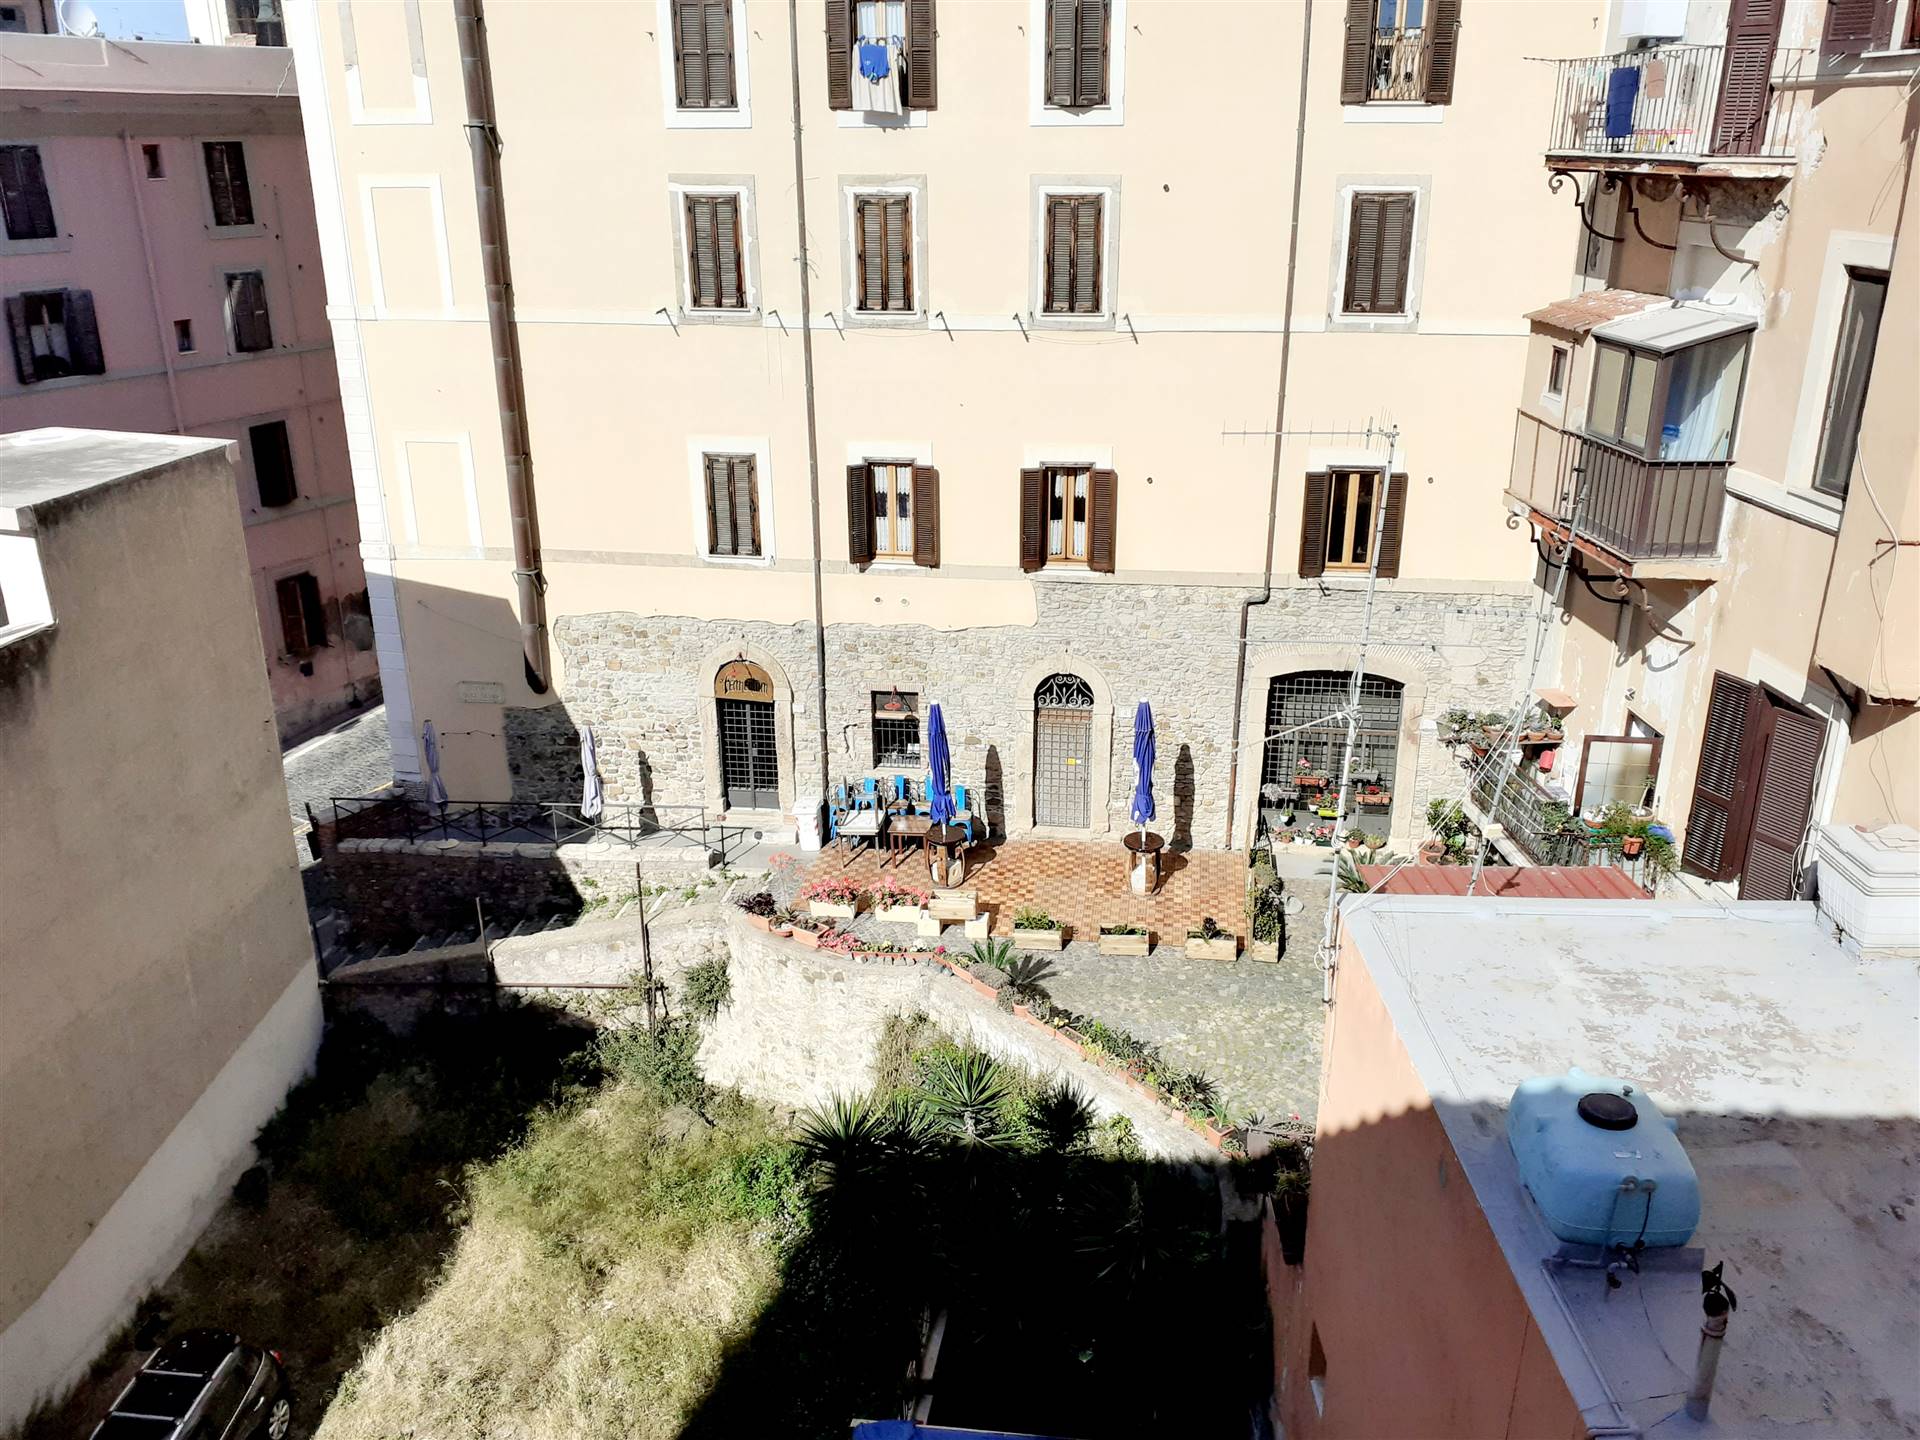 CIVITAVECCHIA, Apartment for sale of 71 Sq. mt., Restored, Heating Individual heating system, Energetic class: G, Epi: 175 kwh/m2 year, placed at 4°, composed by: 3 Rooms, Show cooking, , 2 Bedrooms, 